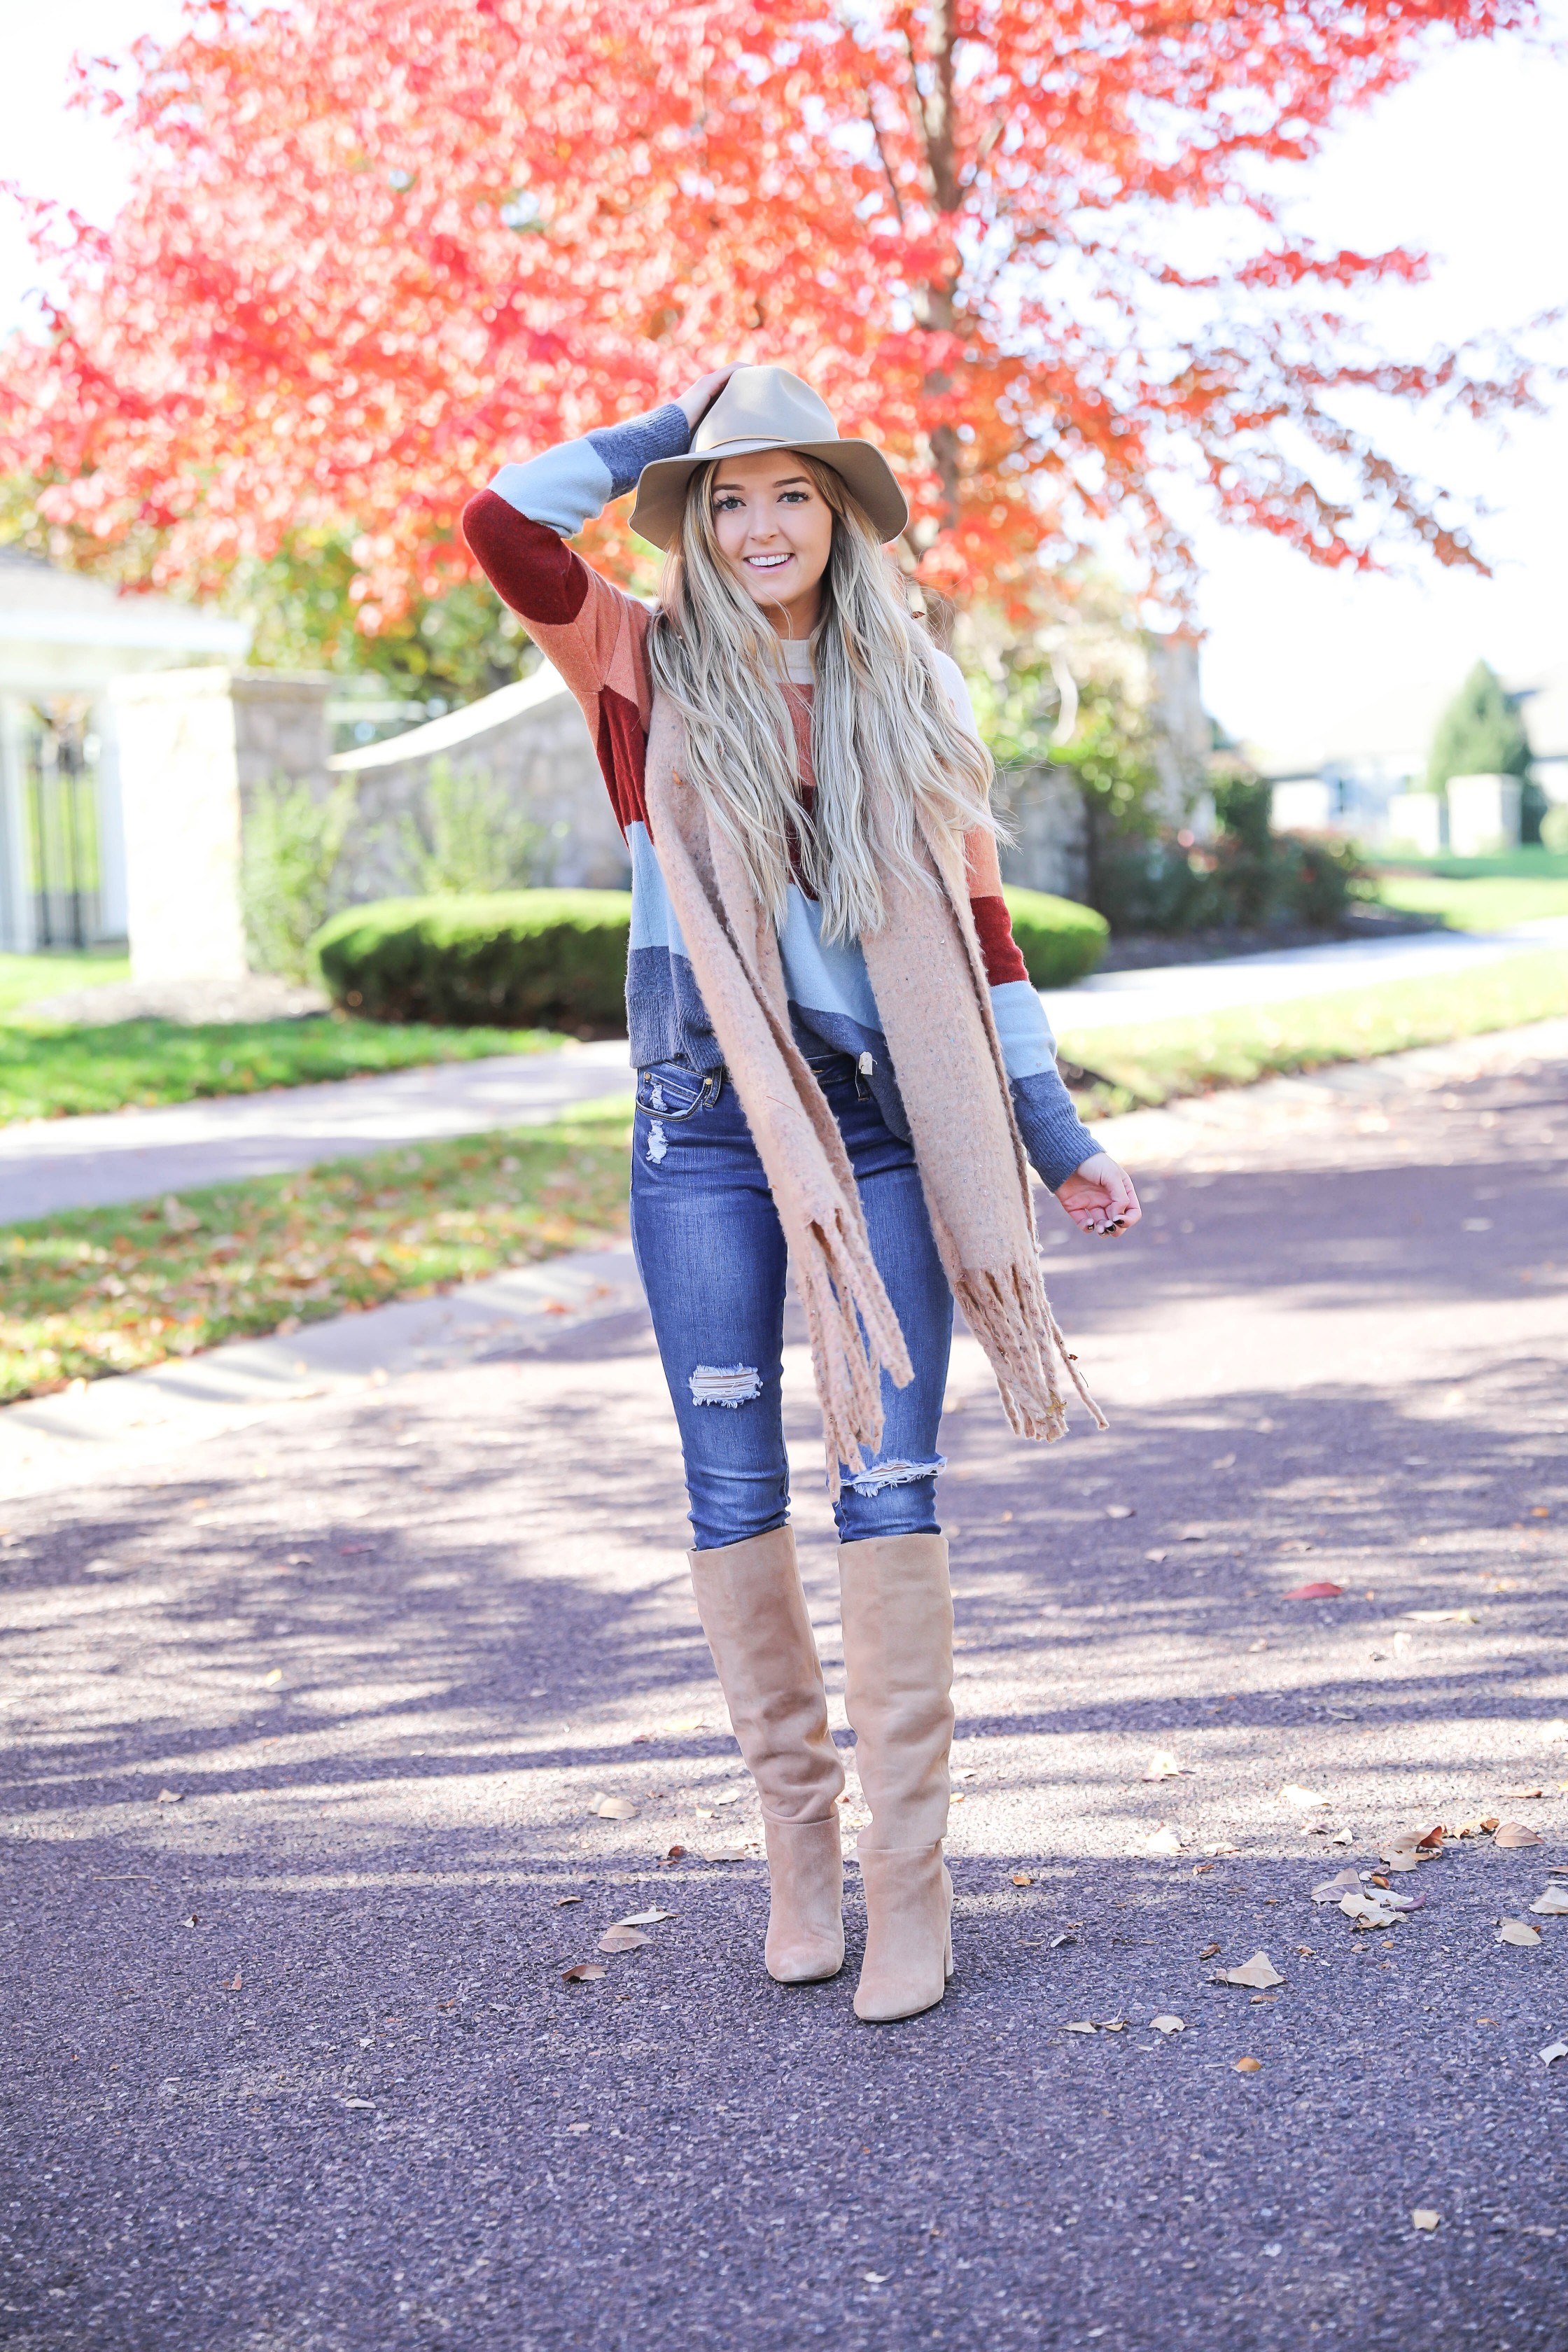 Colorblocking sweater from Madewell! Love this fall leaves picture! This fall outfit is perfect, I especially love the heavy scarf! Detail on fashion blog daily dose of charm by lauren lindmark